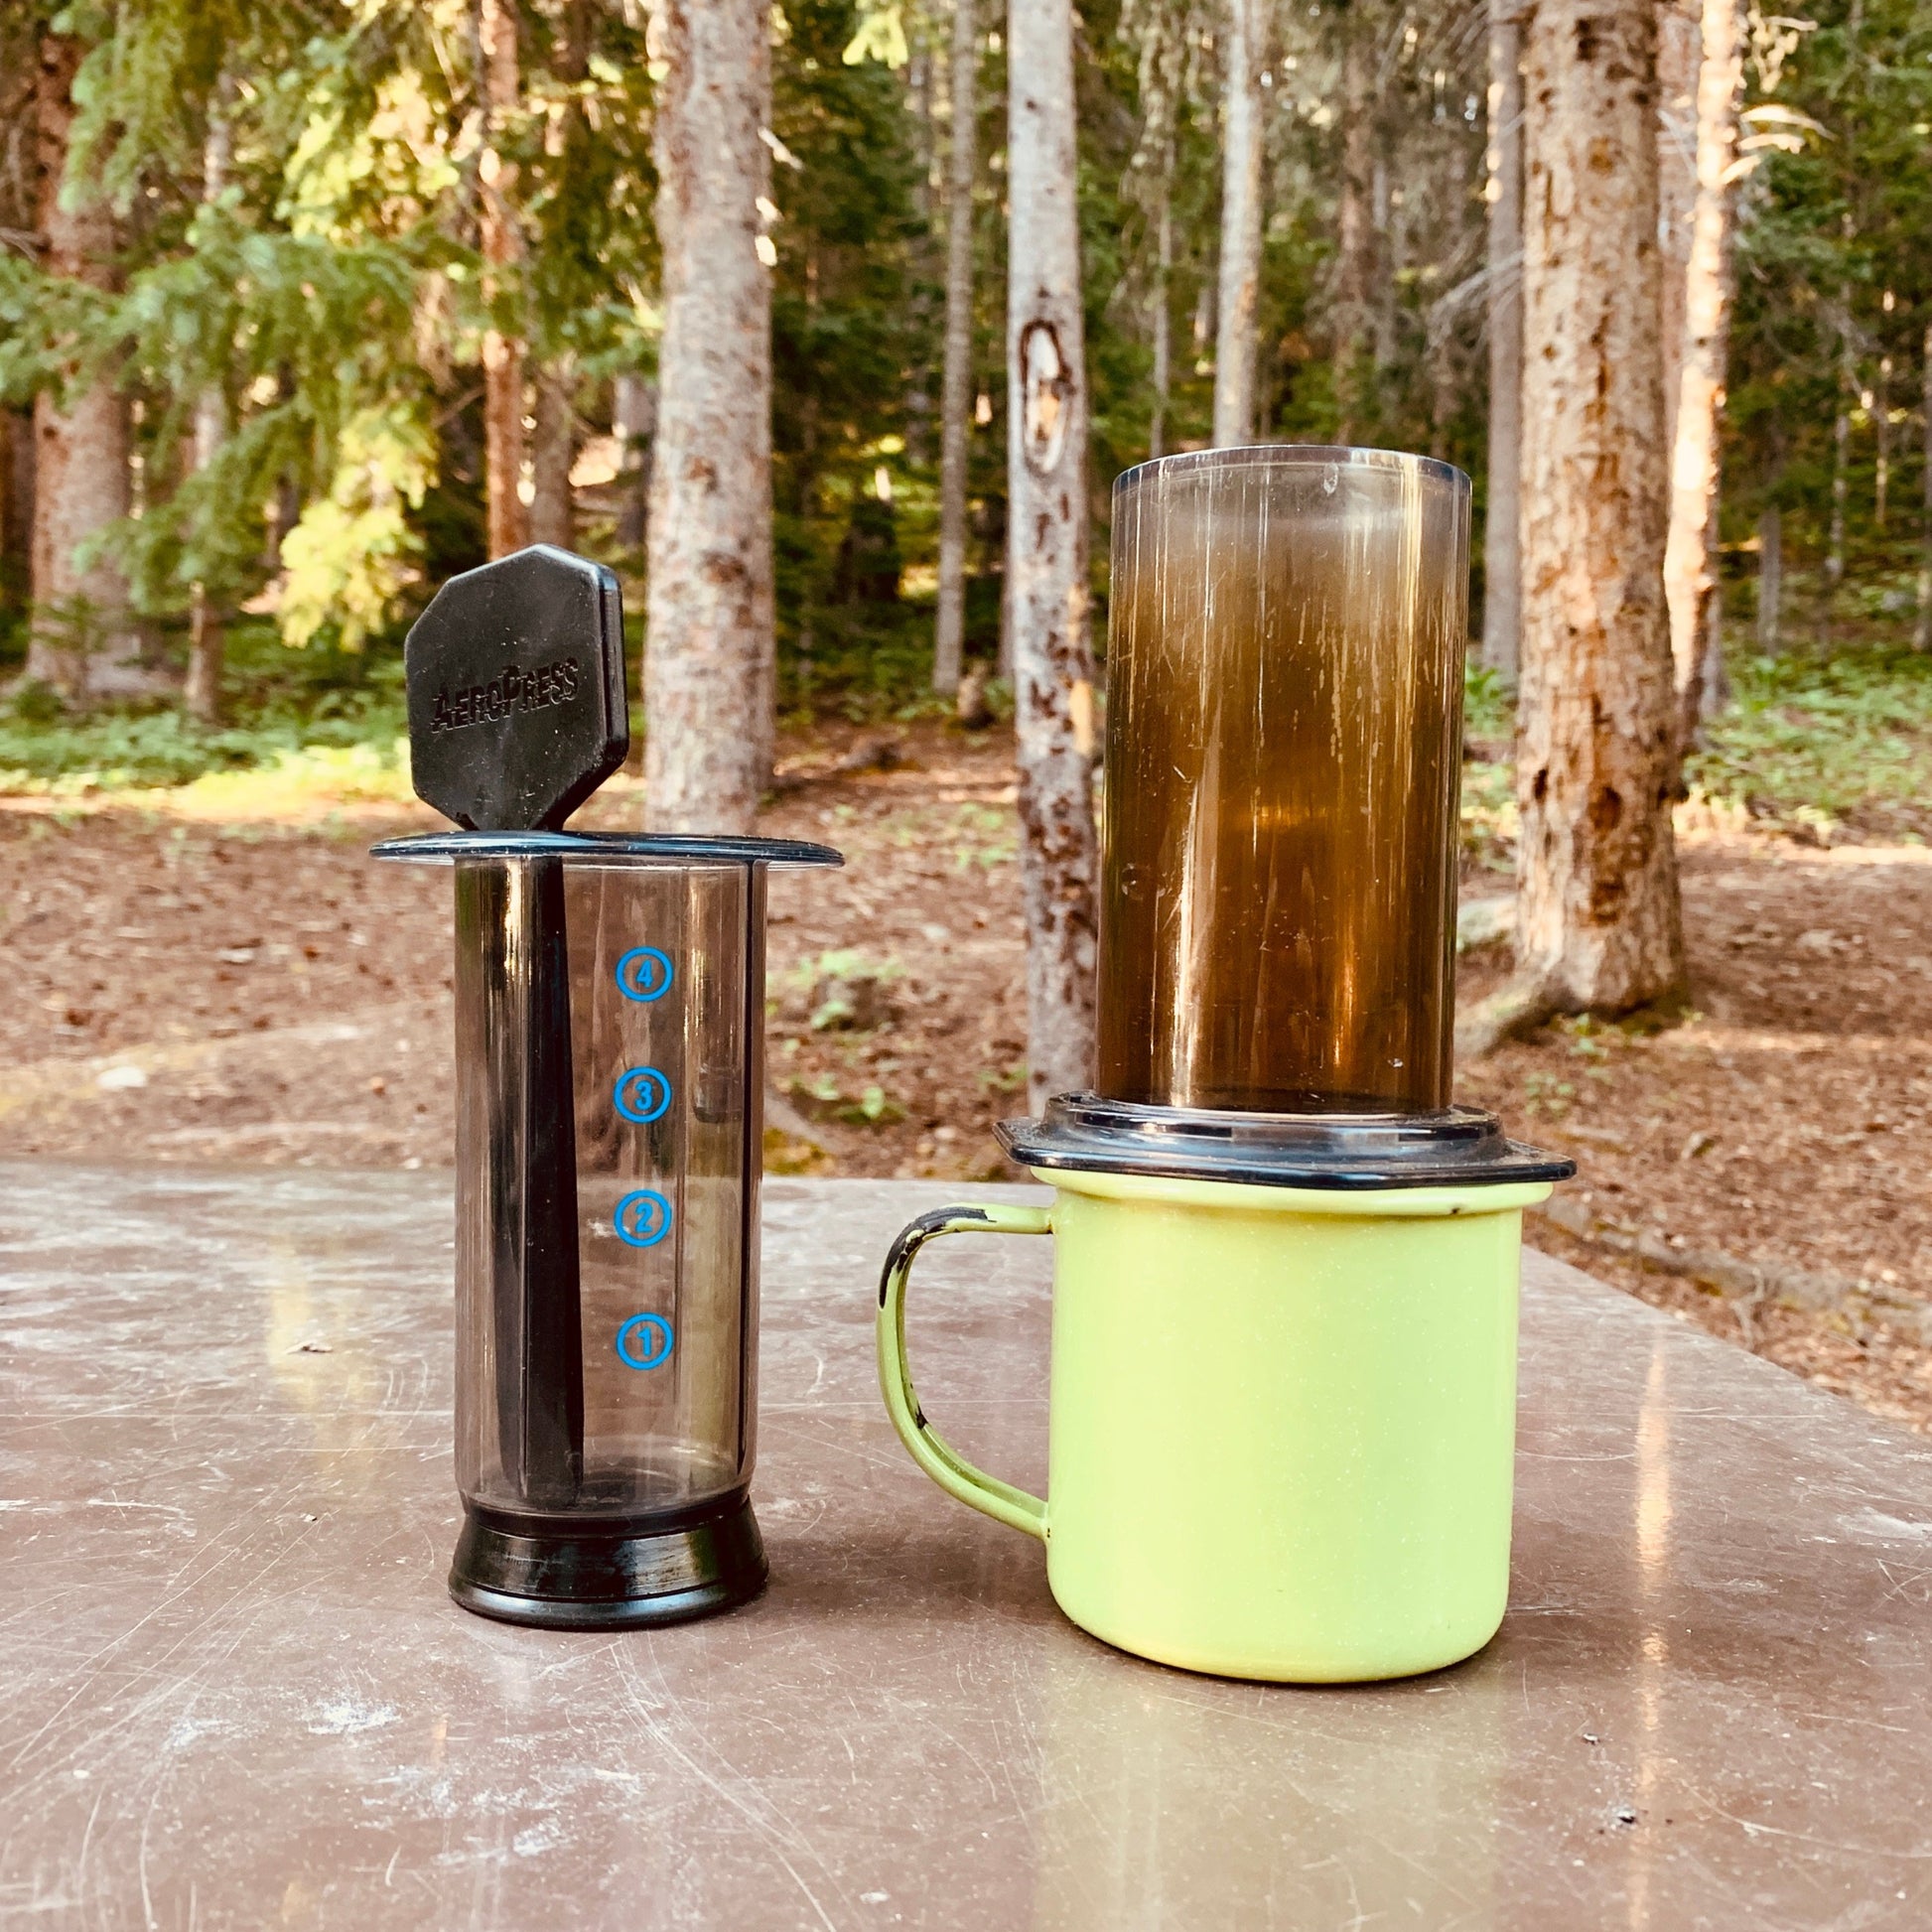 AeroPress kit with a camping mug in the forest.